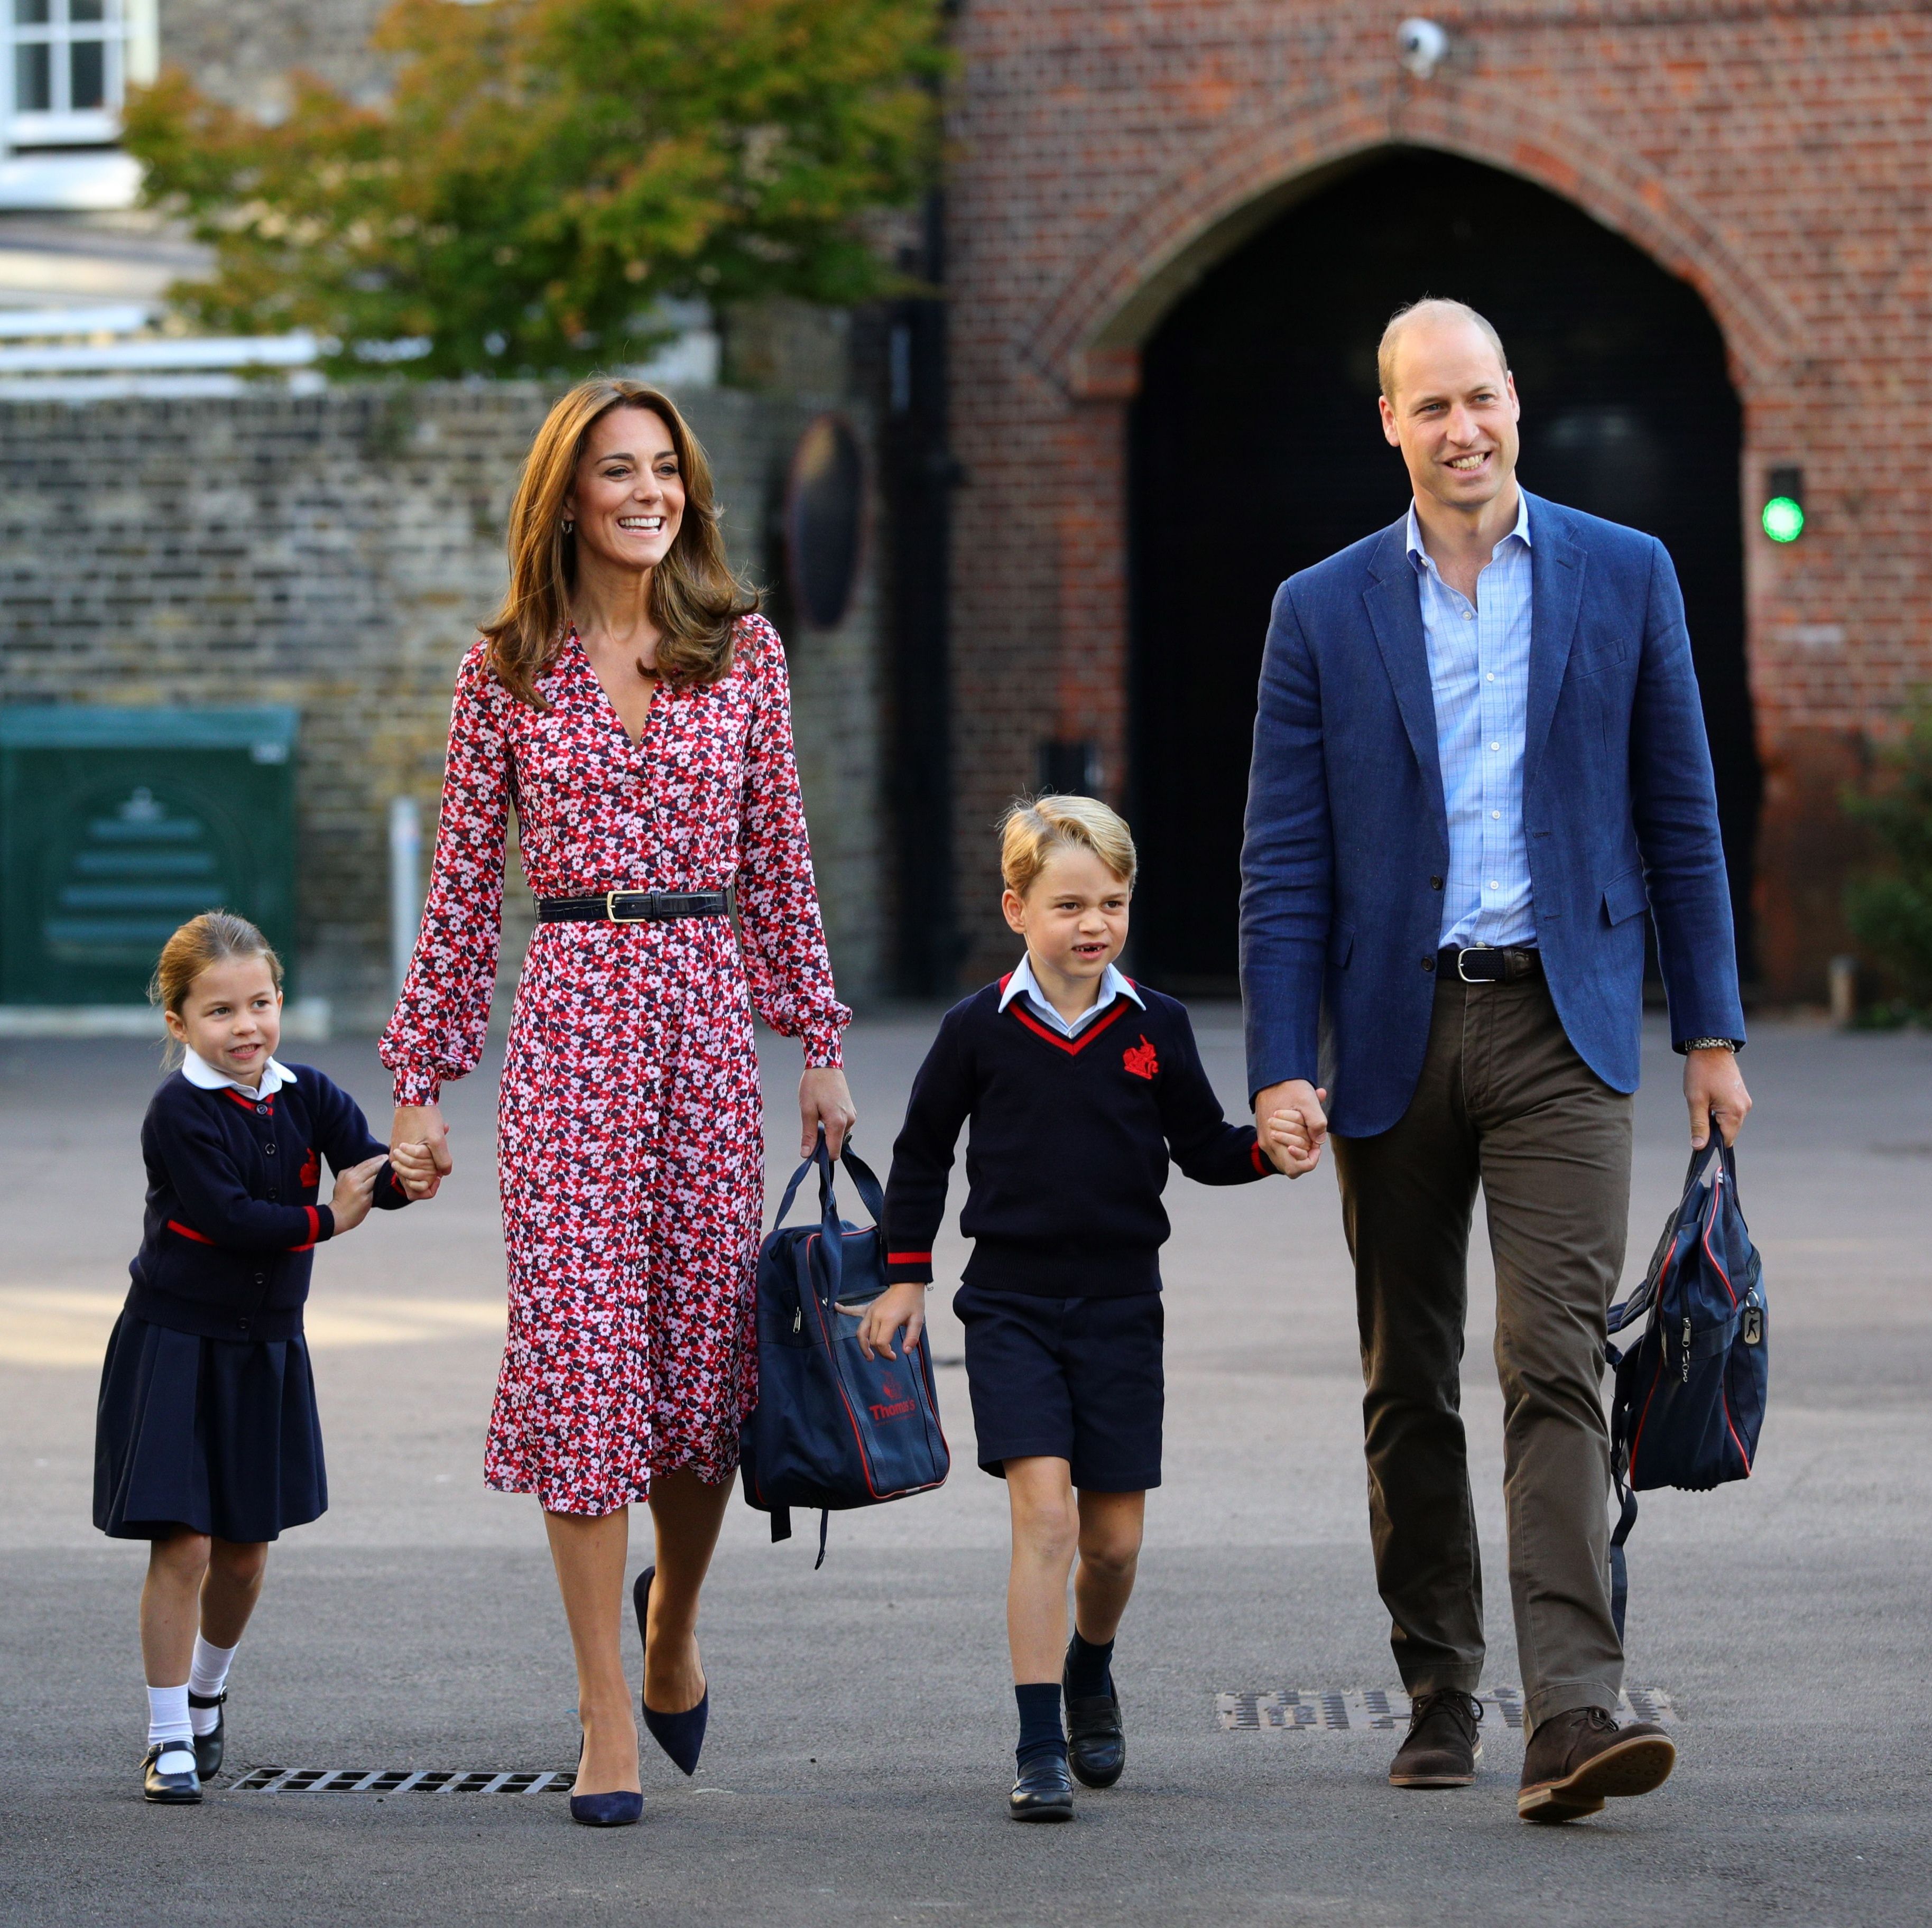 Prince William and Kate Middleton Won't Have Live-In Staff at New Home, Will Pay Rent from Private Account